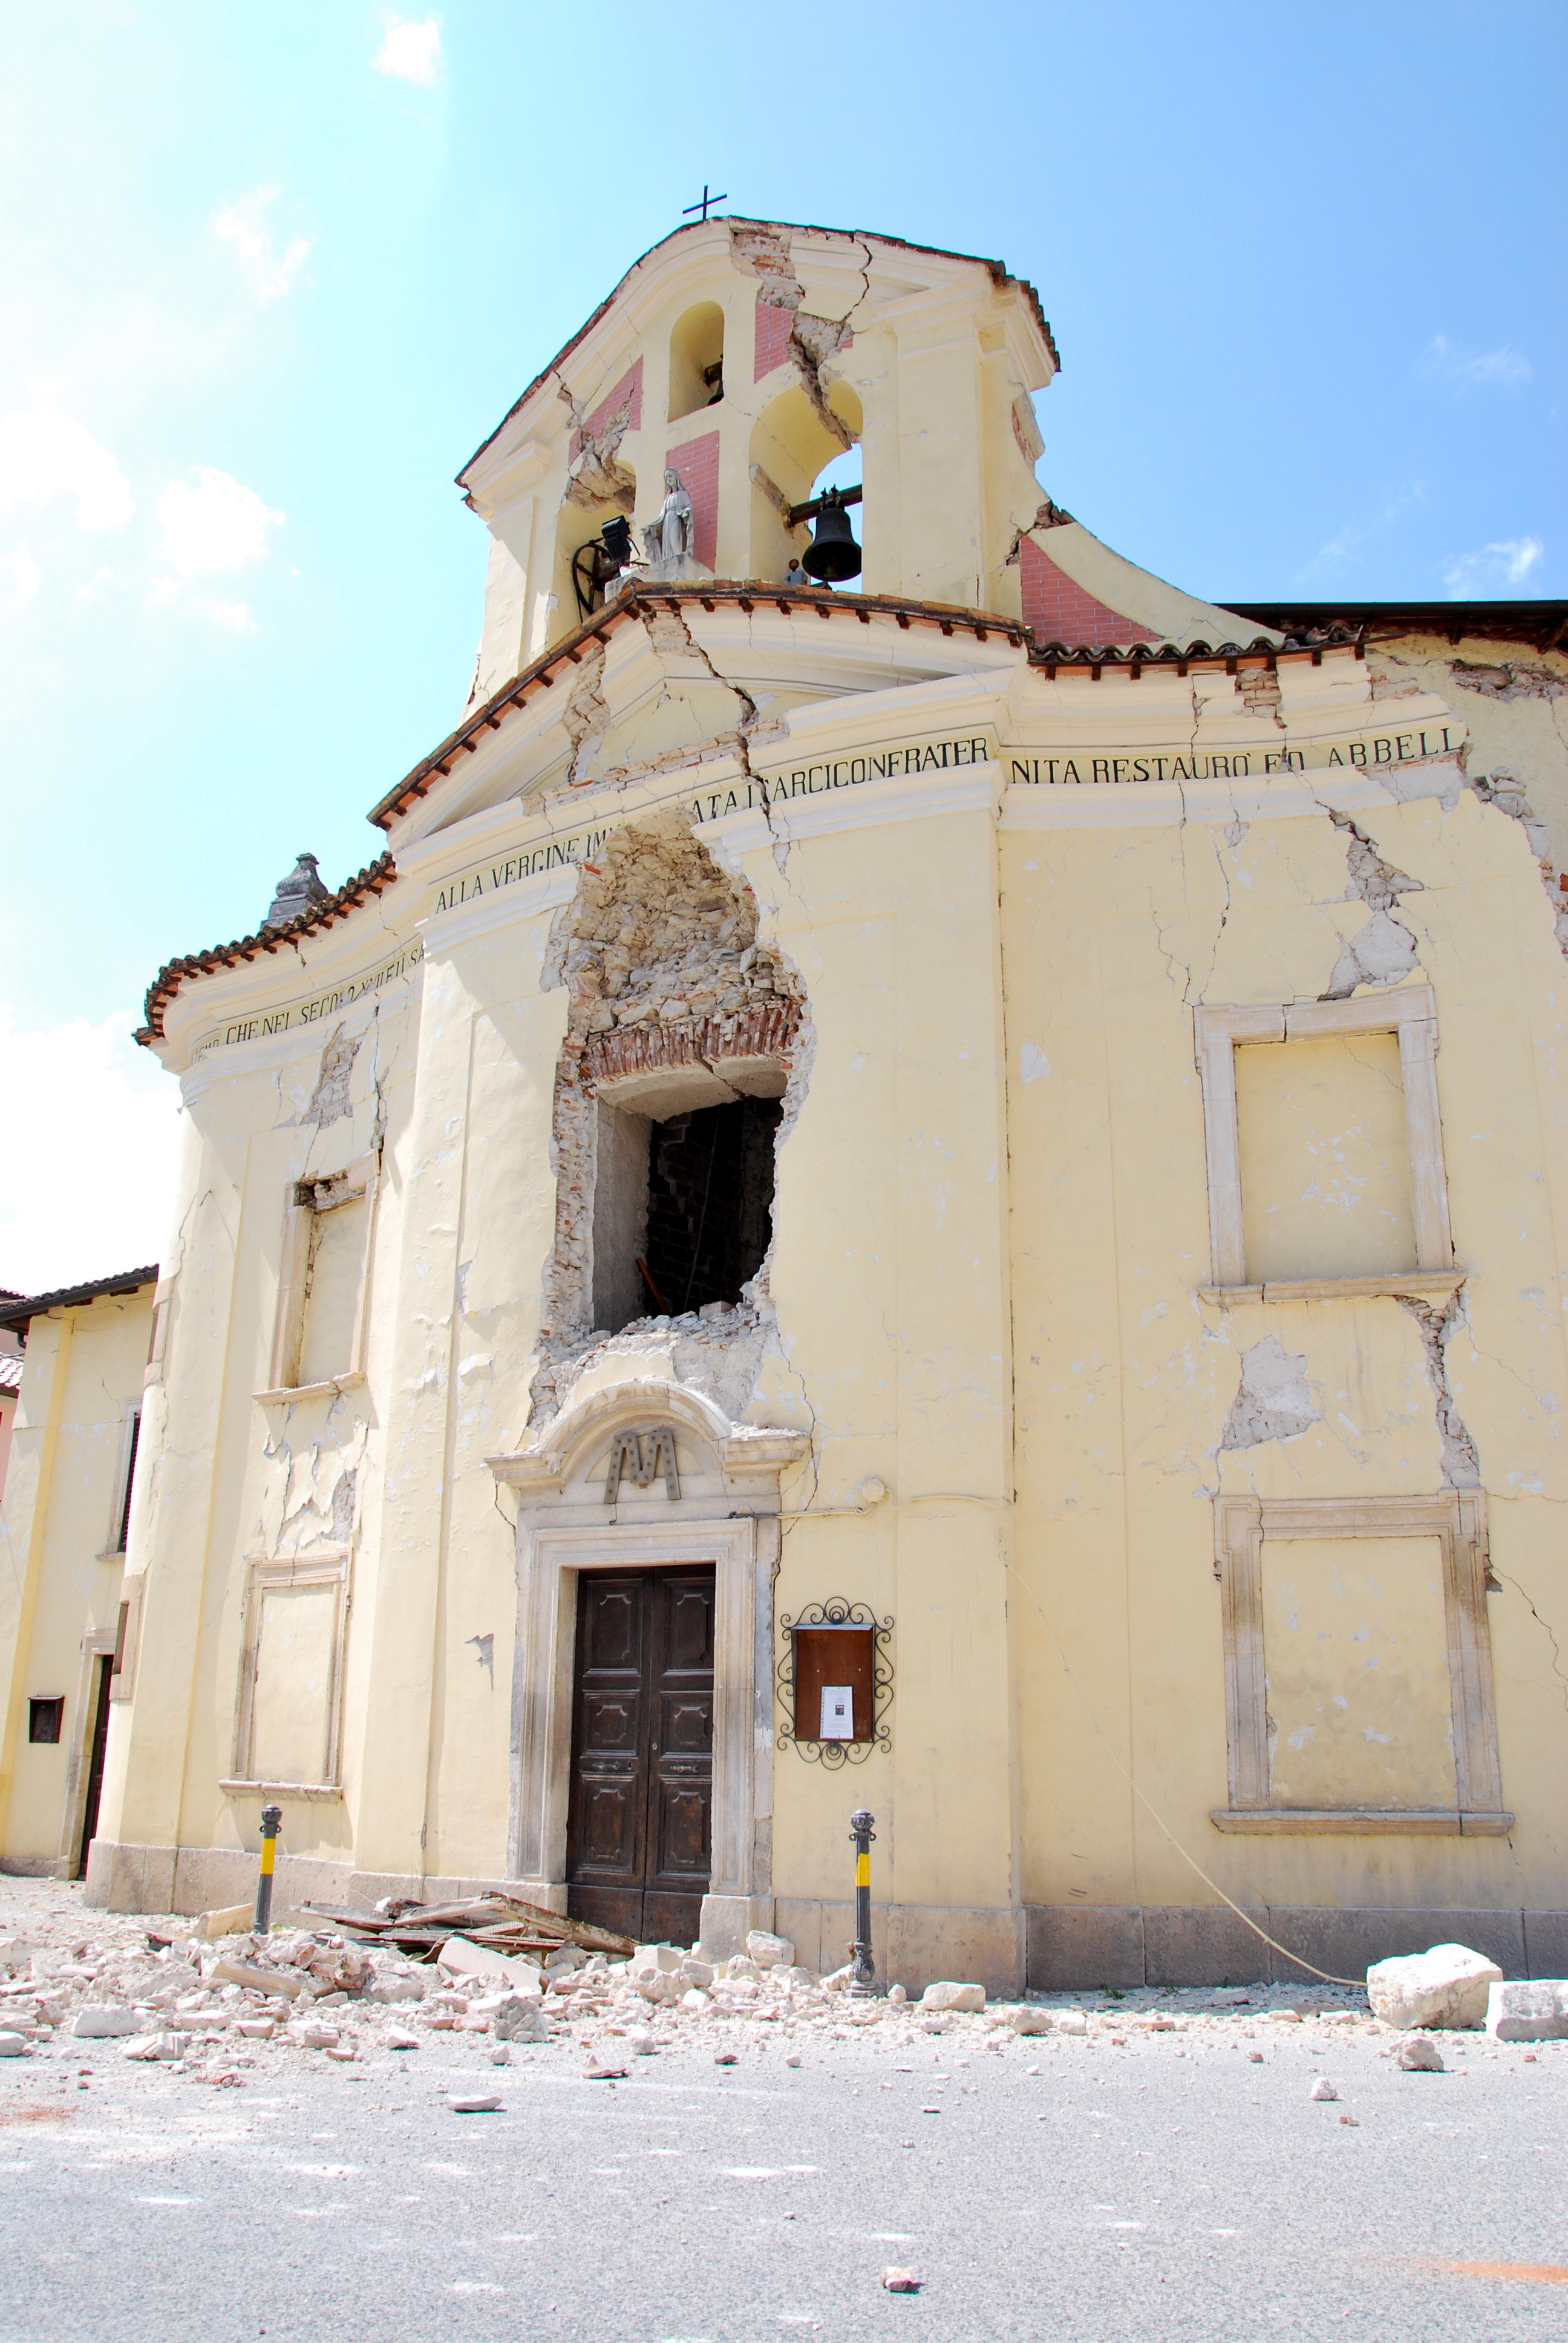 By Flickr user pablo72, the Santa Maria Church in Paganica, damaged by the 2009 Earthquake